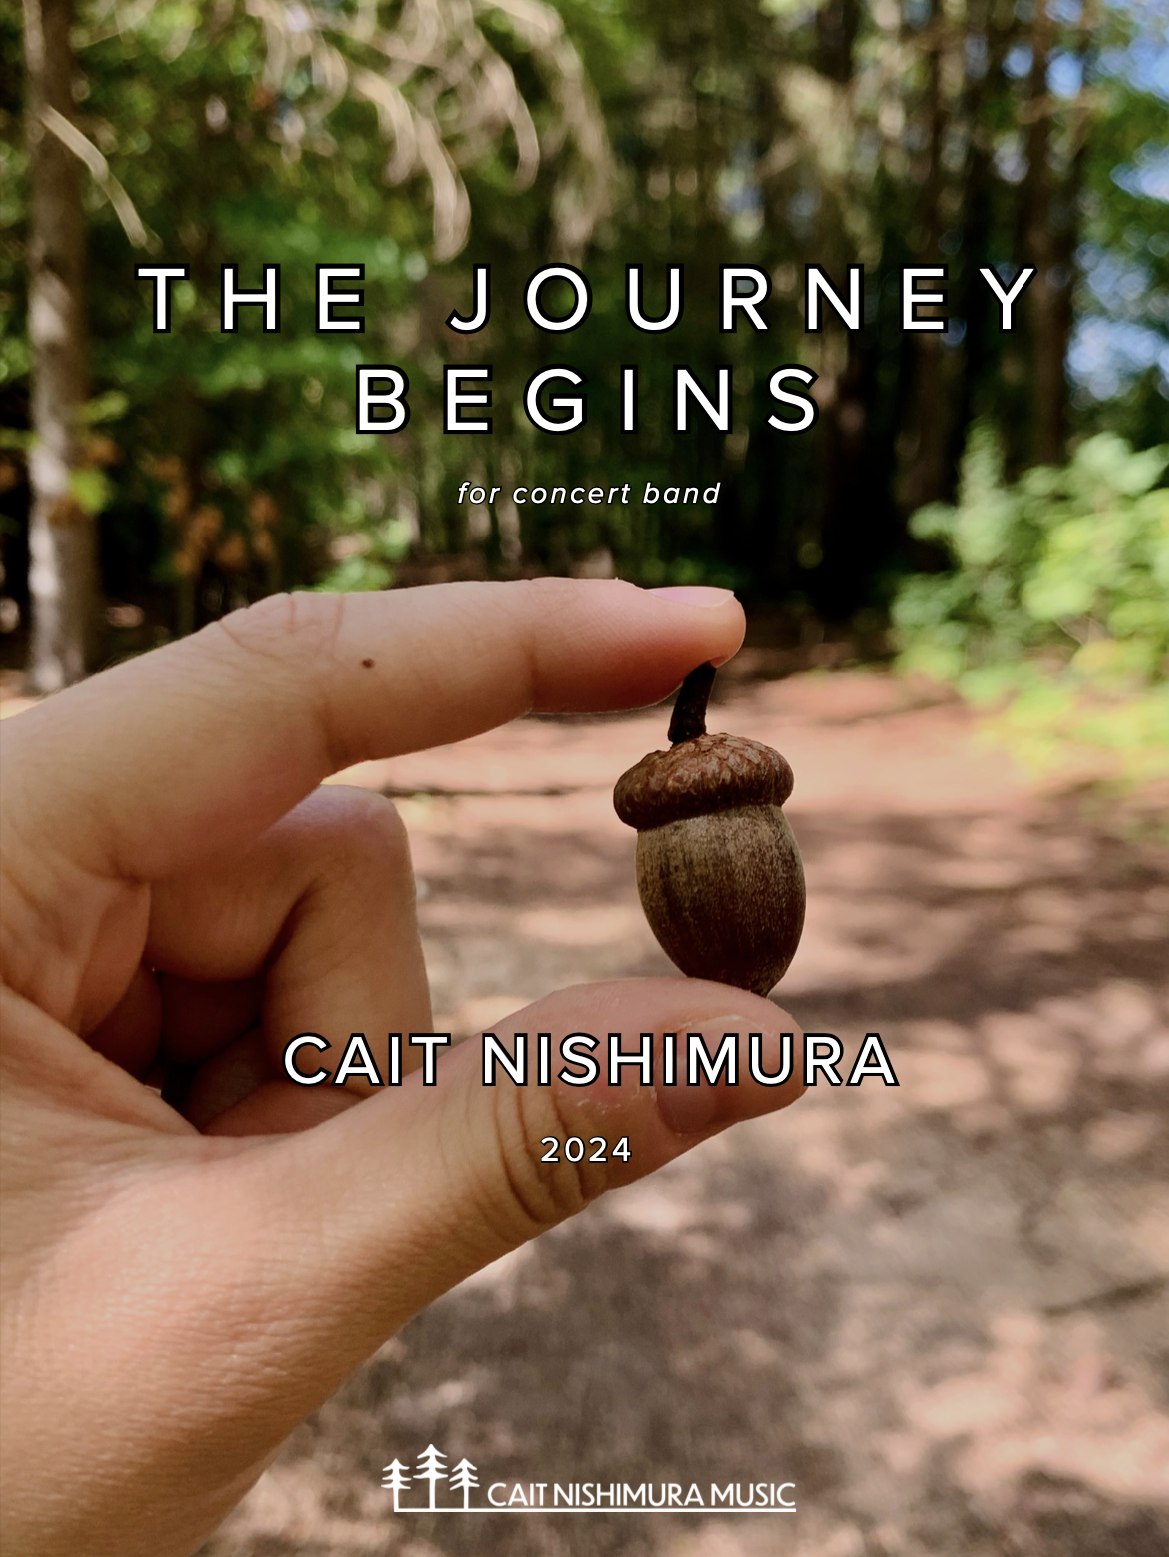 The Journey Begins by Cait Nishimura